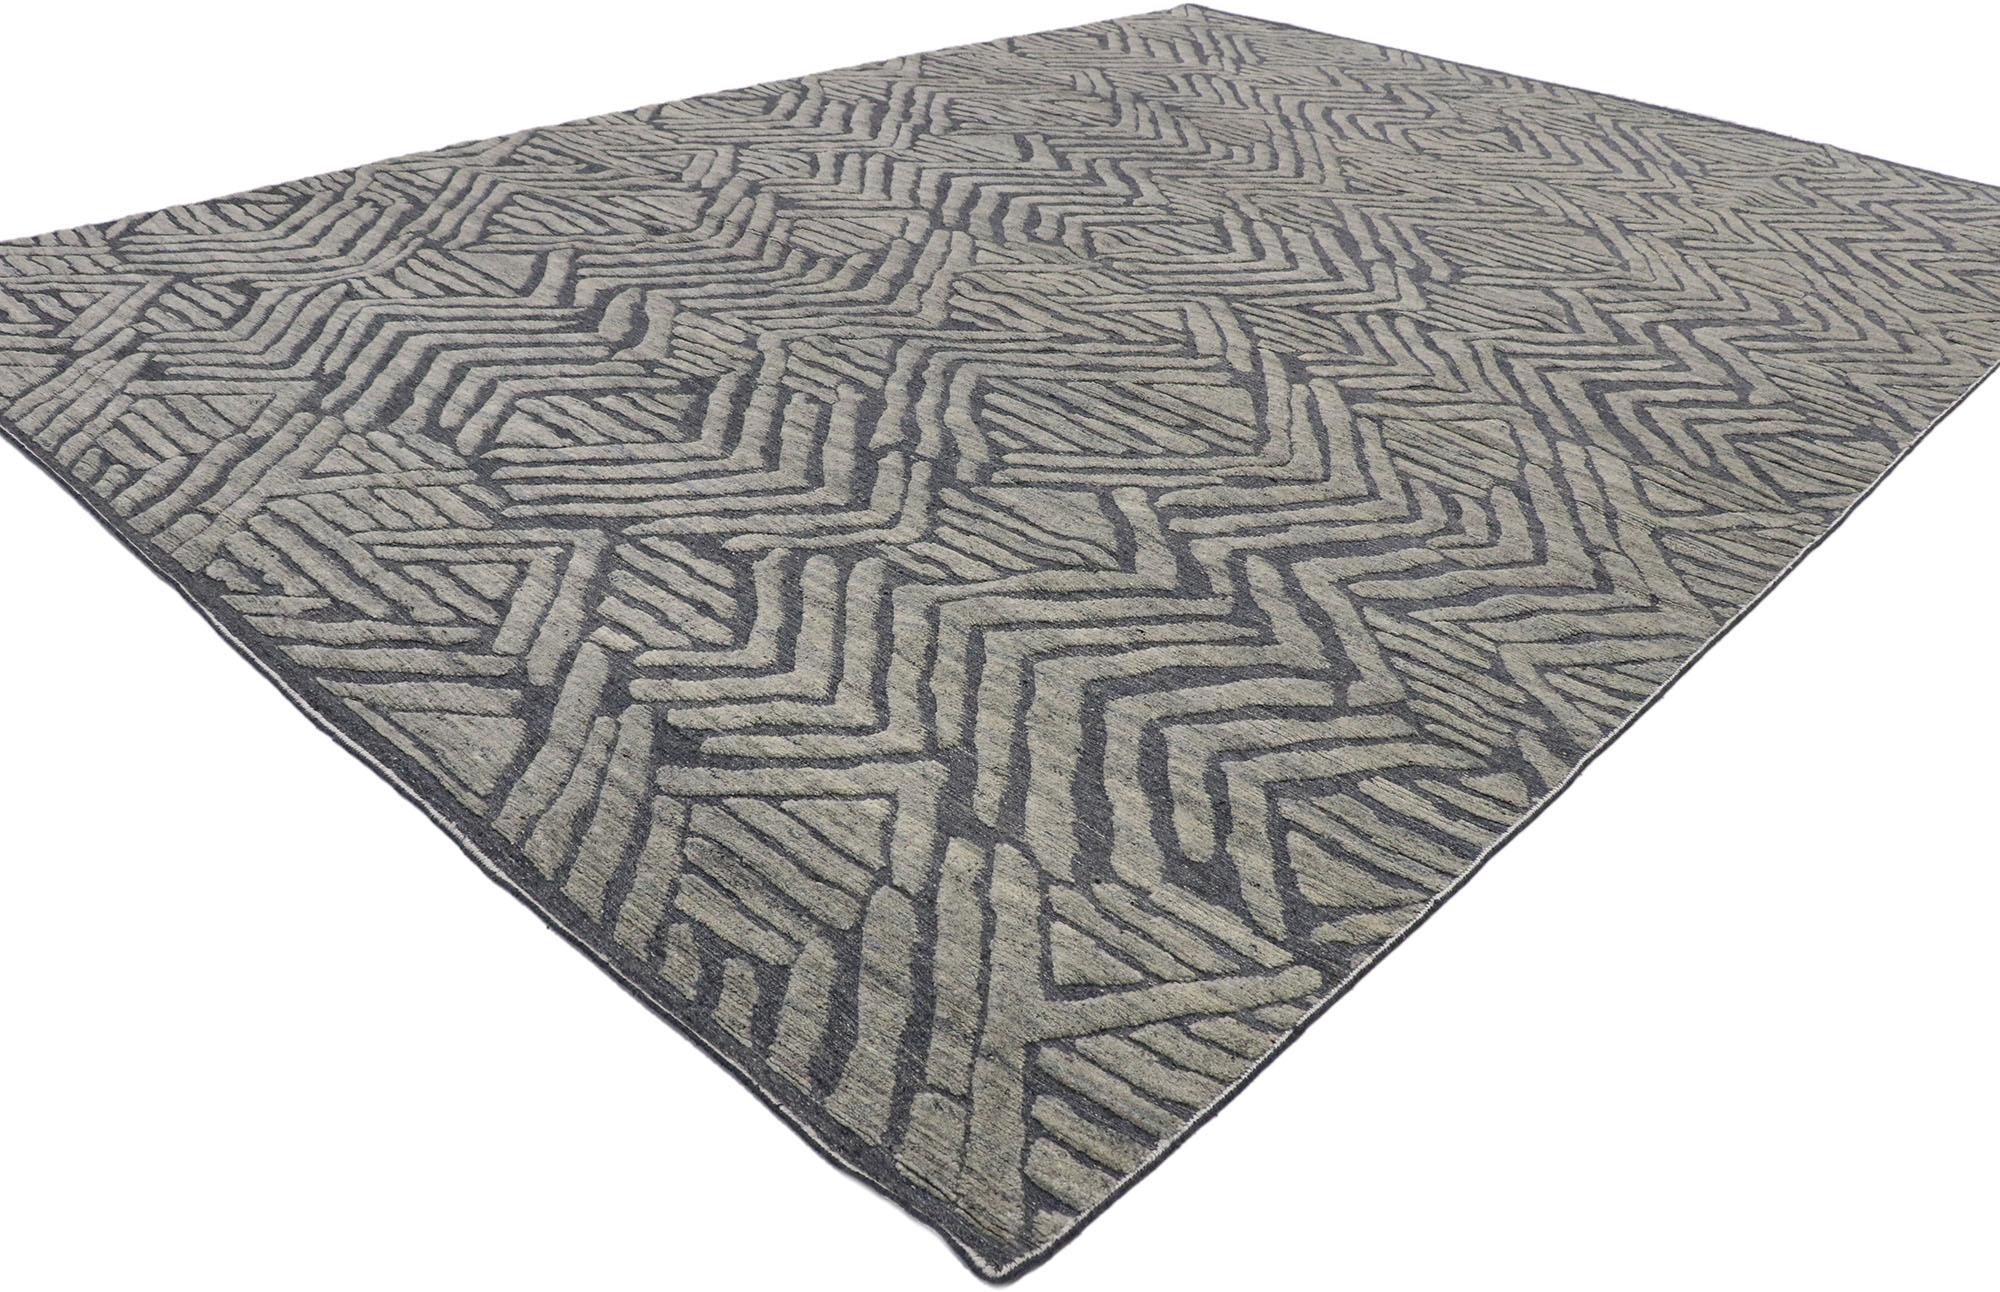 30583, new contemporary Moroccan Souf rug with Raised design and Modern style. This hand knotted wool new contemporary Moroccan style souf rug features a geometric pattern composed of stacked horizontal bands enclosed with expanding V-shapes on